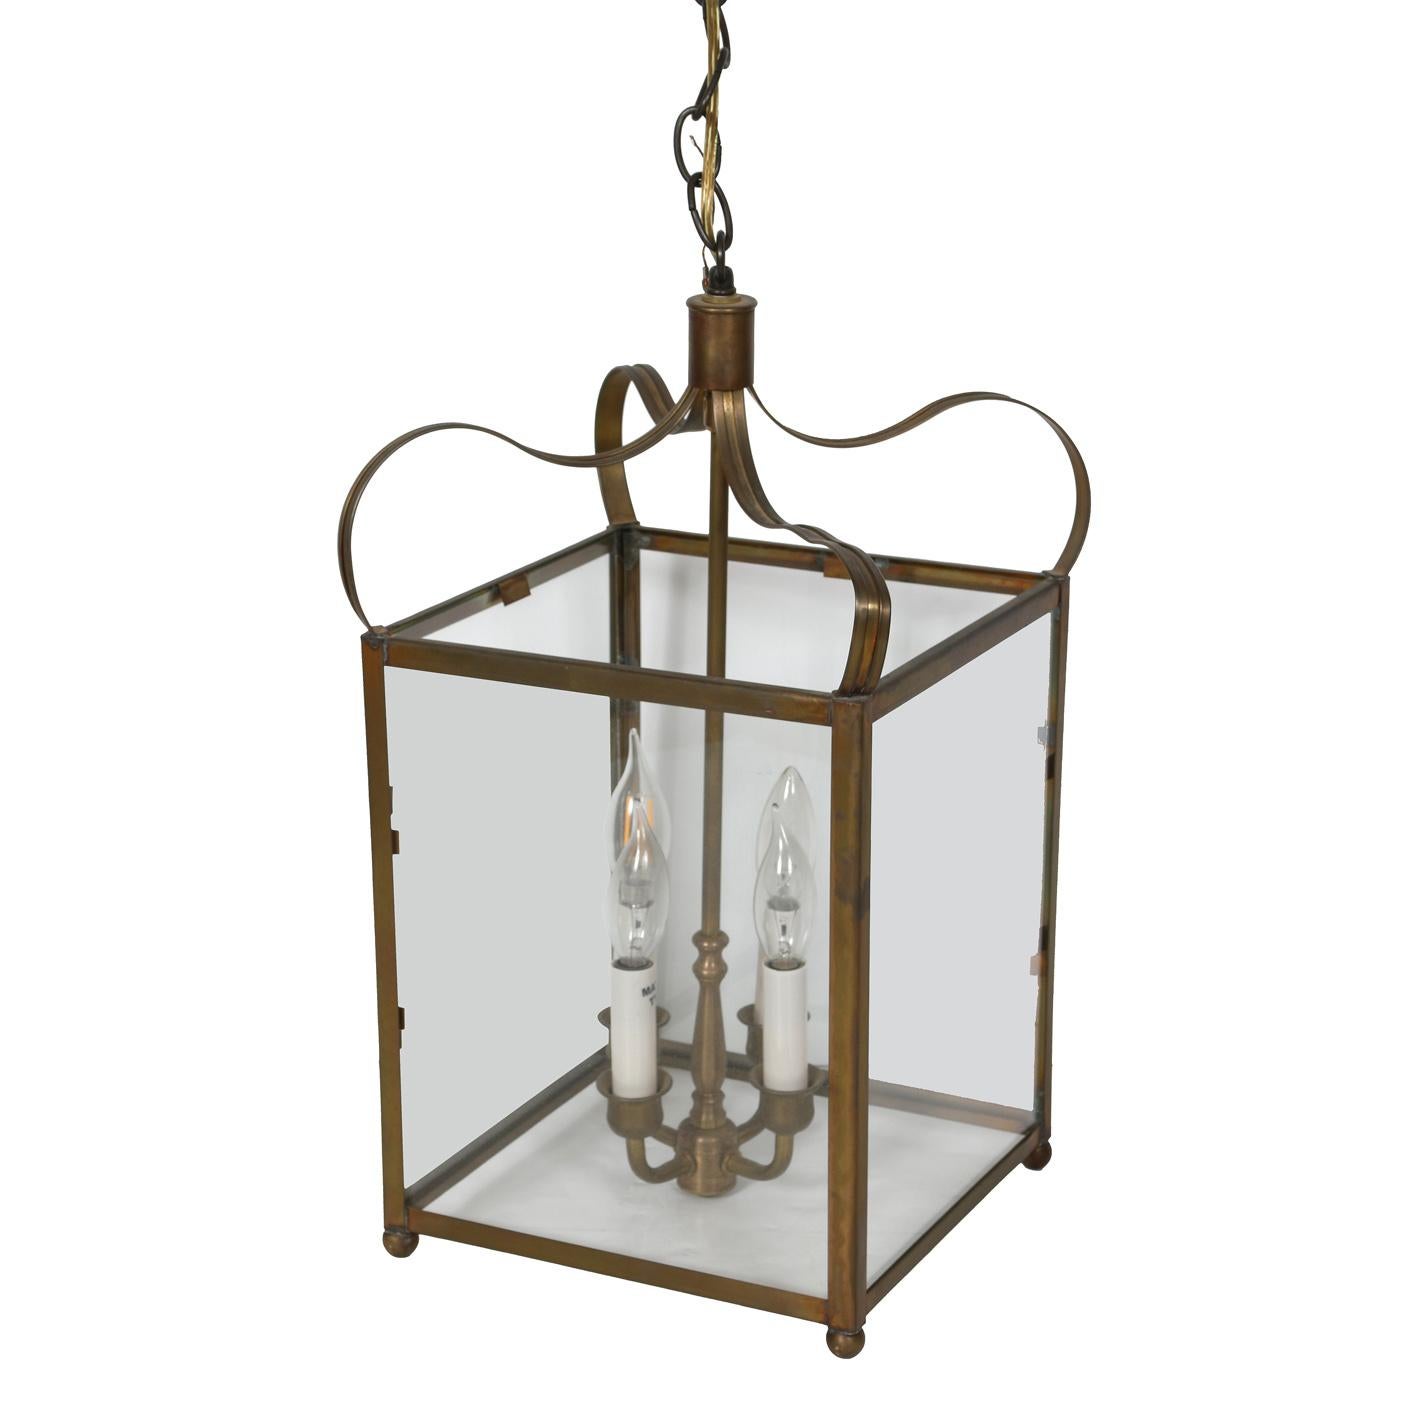 Pair of Vintage Brass Square Lanterns In Good Condition For Sale In Locust Valley, NY